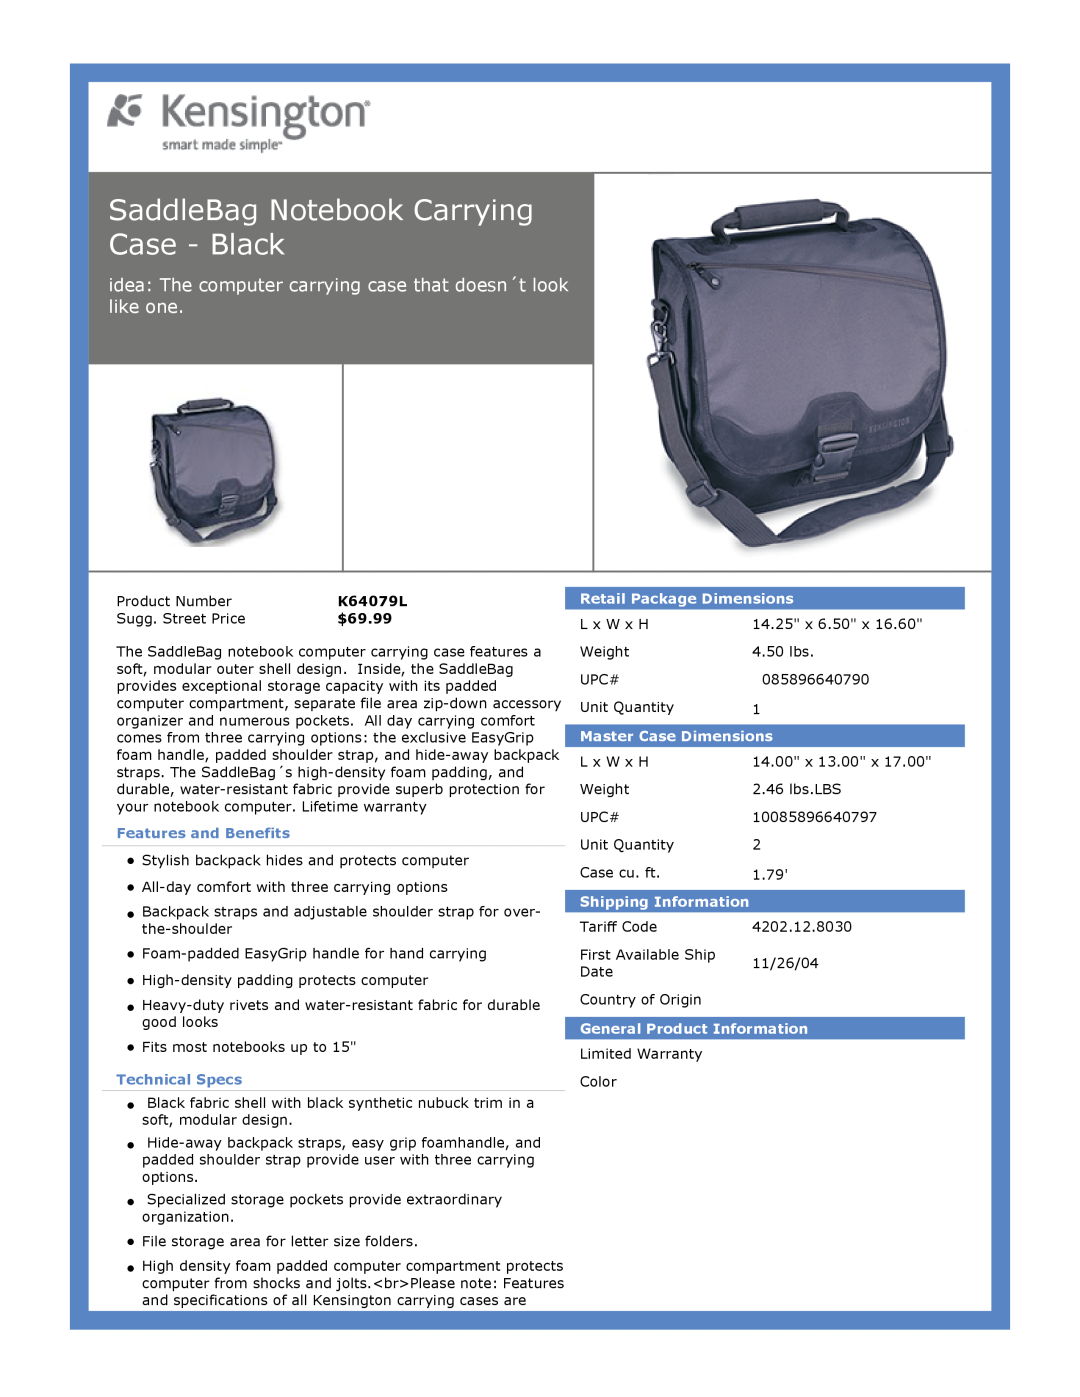 Kensington EU64325 dimensions SaddleBag Notebook Carrying Case - Black, $69.99, Features and Benefits, Technical Specs 